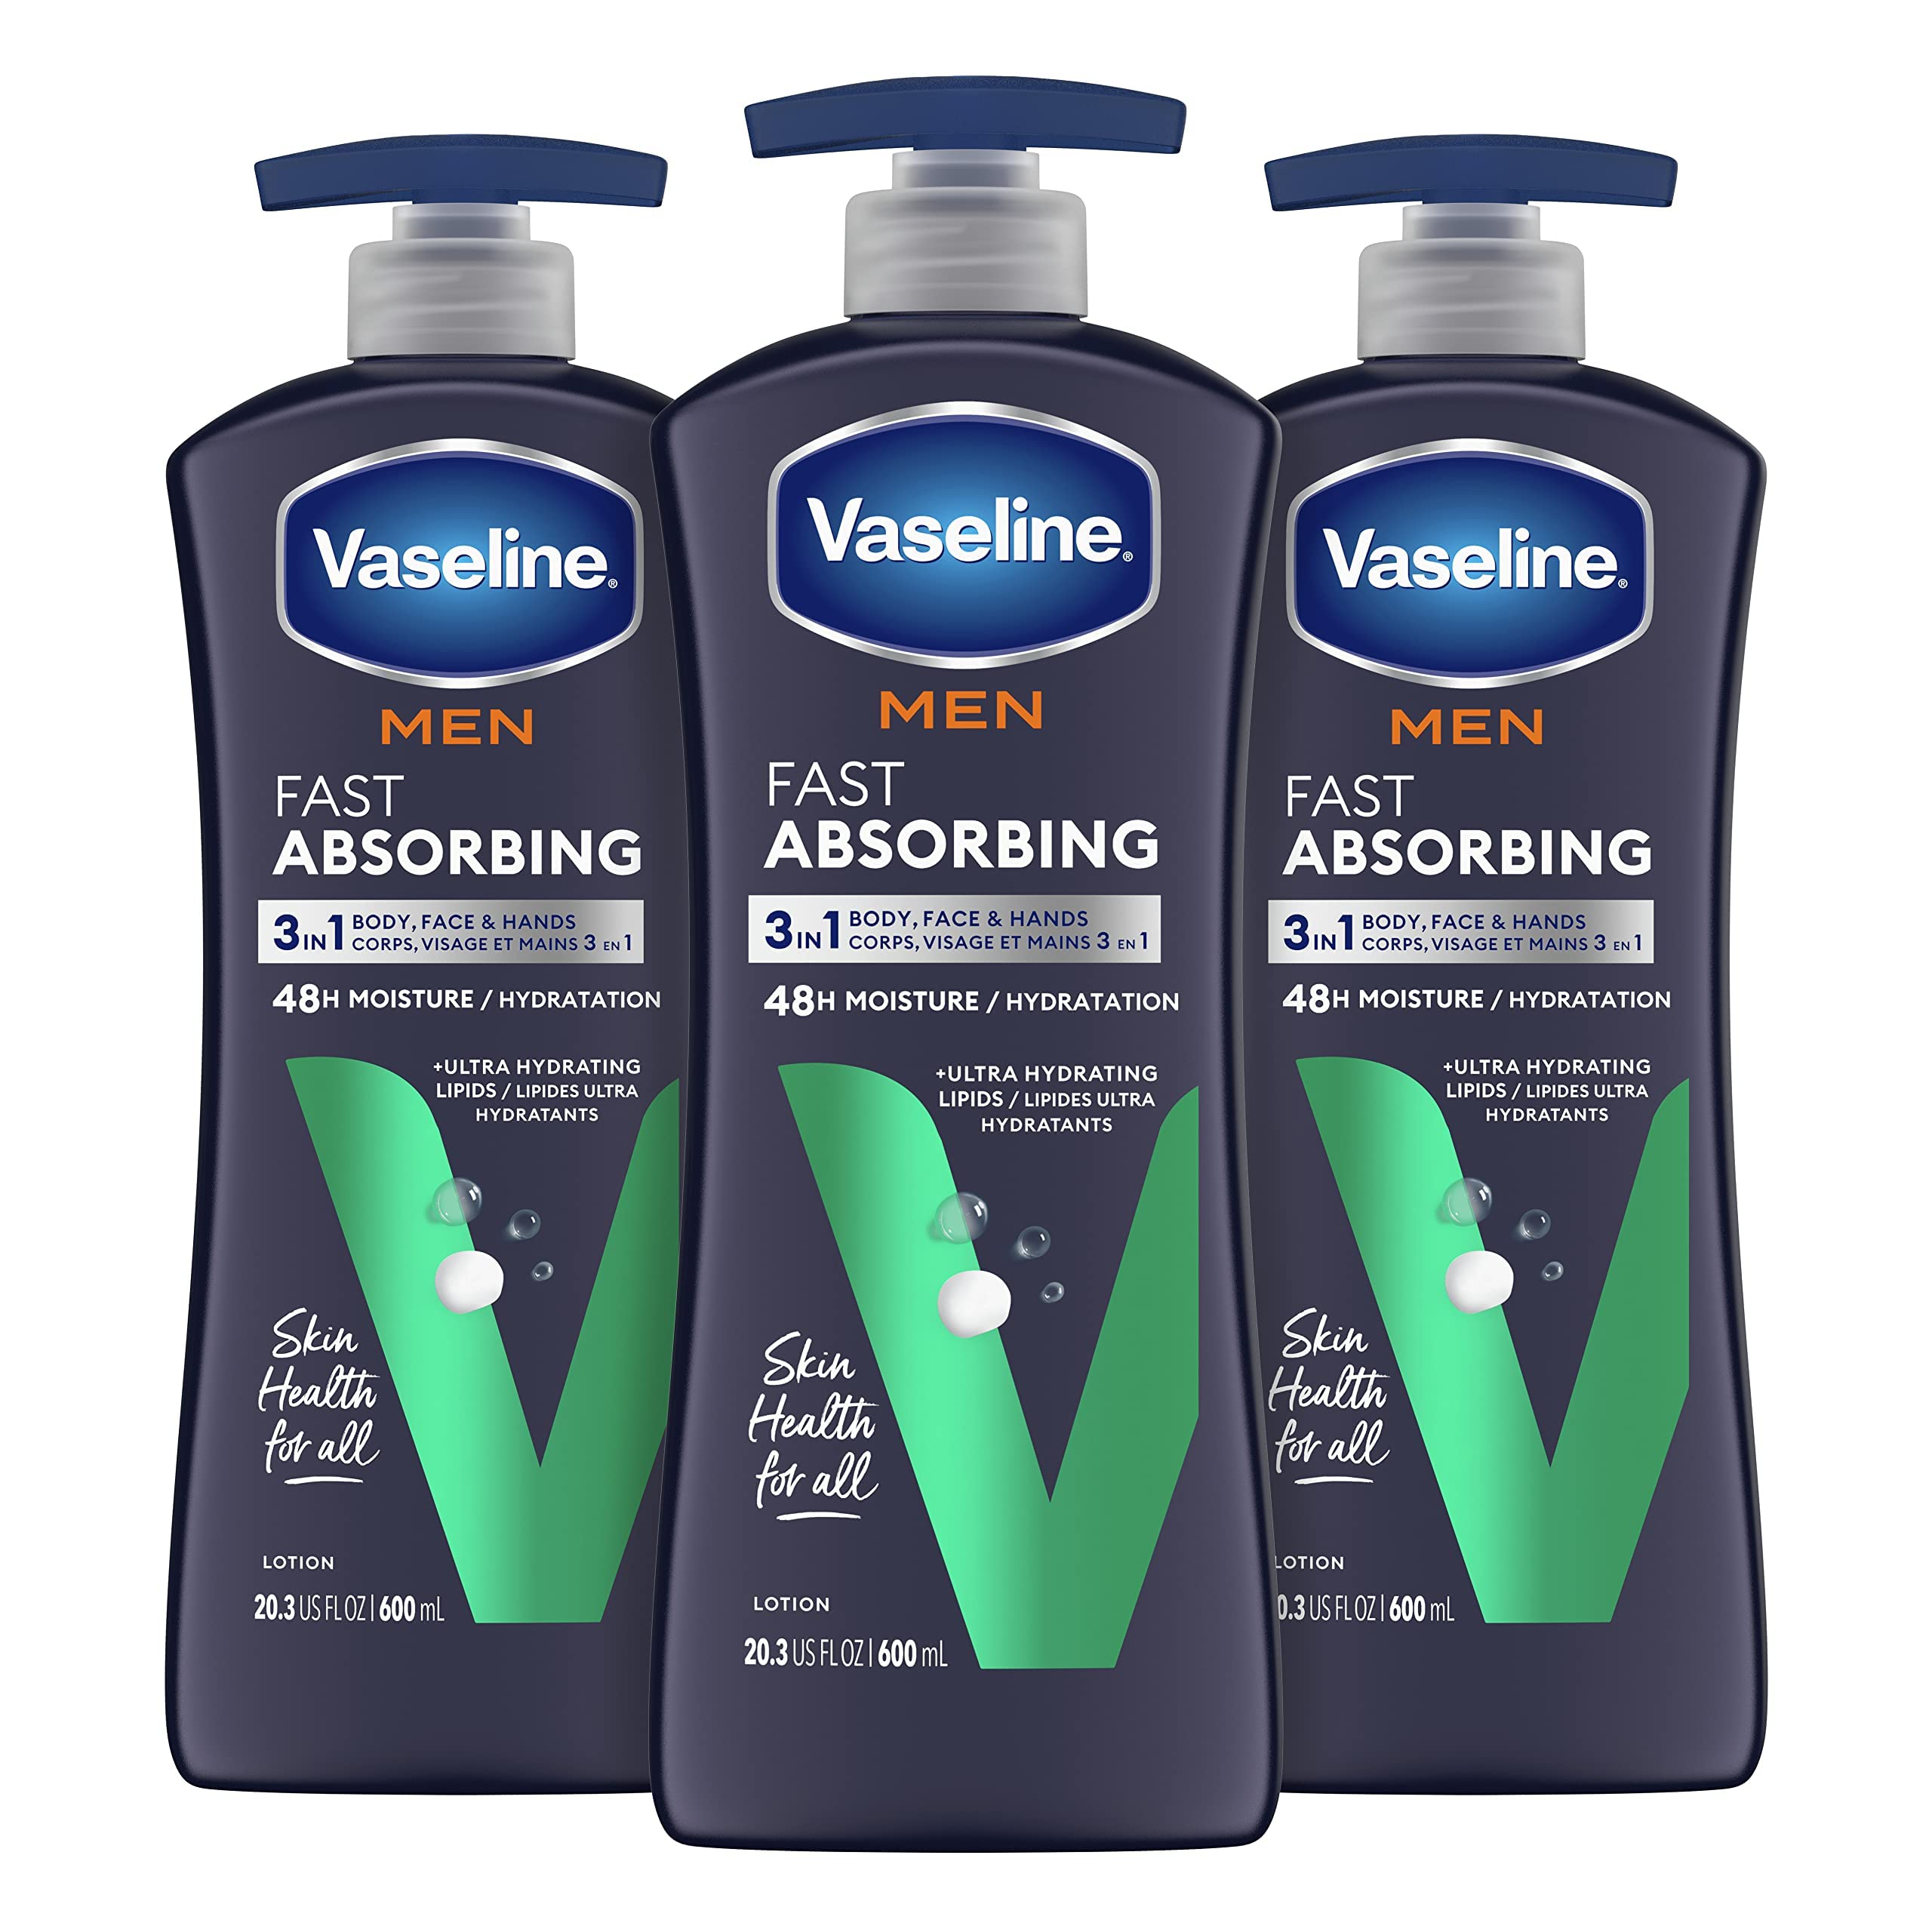 Vaseline Men's Healing Moisture Hand & Body Lotion For Dry or Cracked Skin Fast Absorbing Non-Greasy Lotion for Men 20.3 oz, Pack of 3